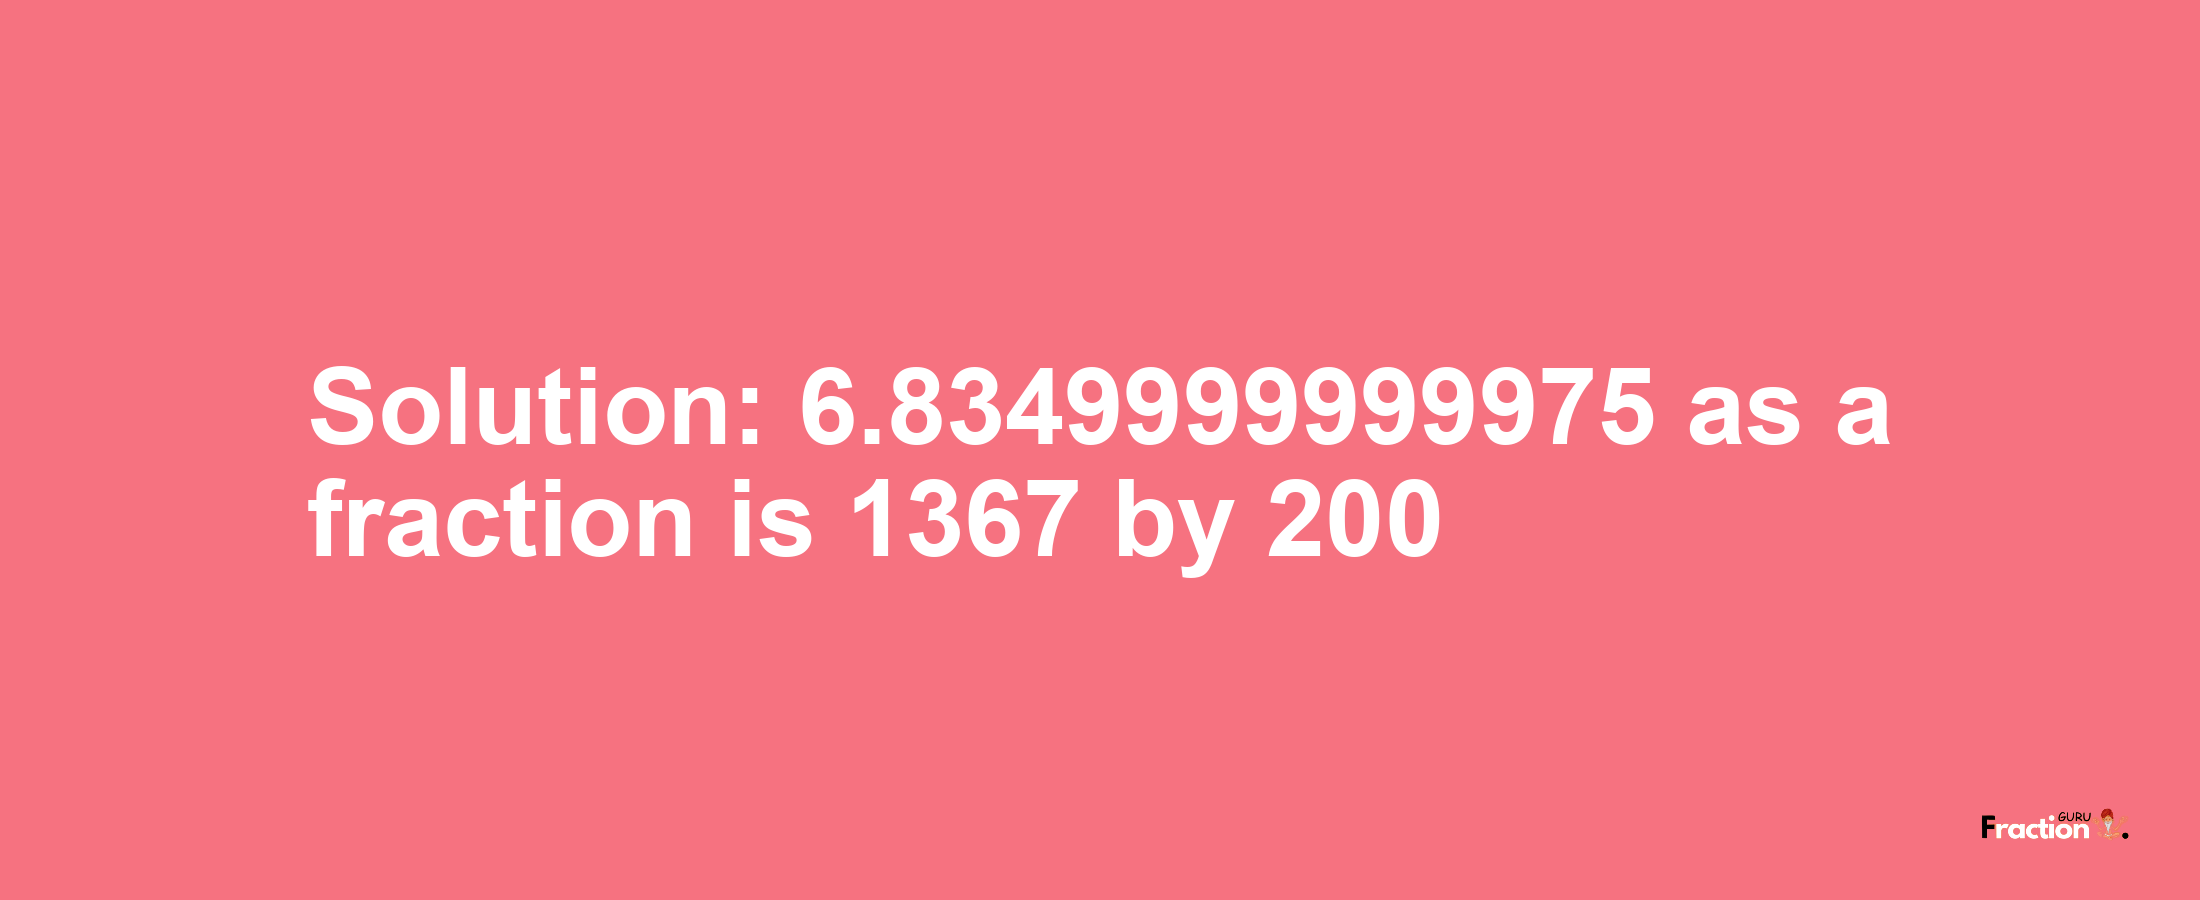 Solution:6.8349999999975 as a fraction is 1367/200